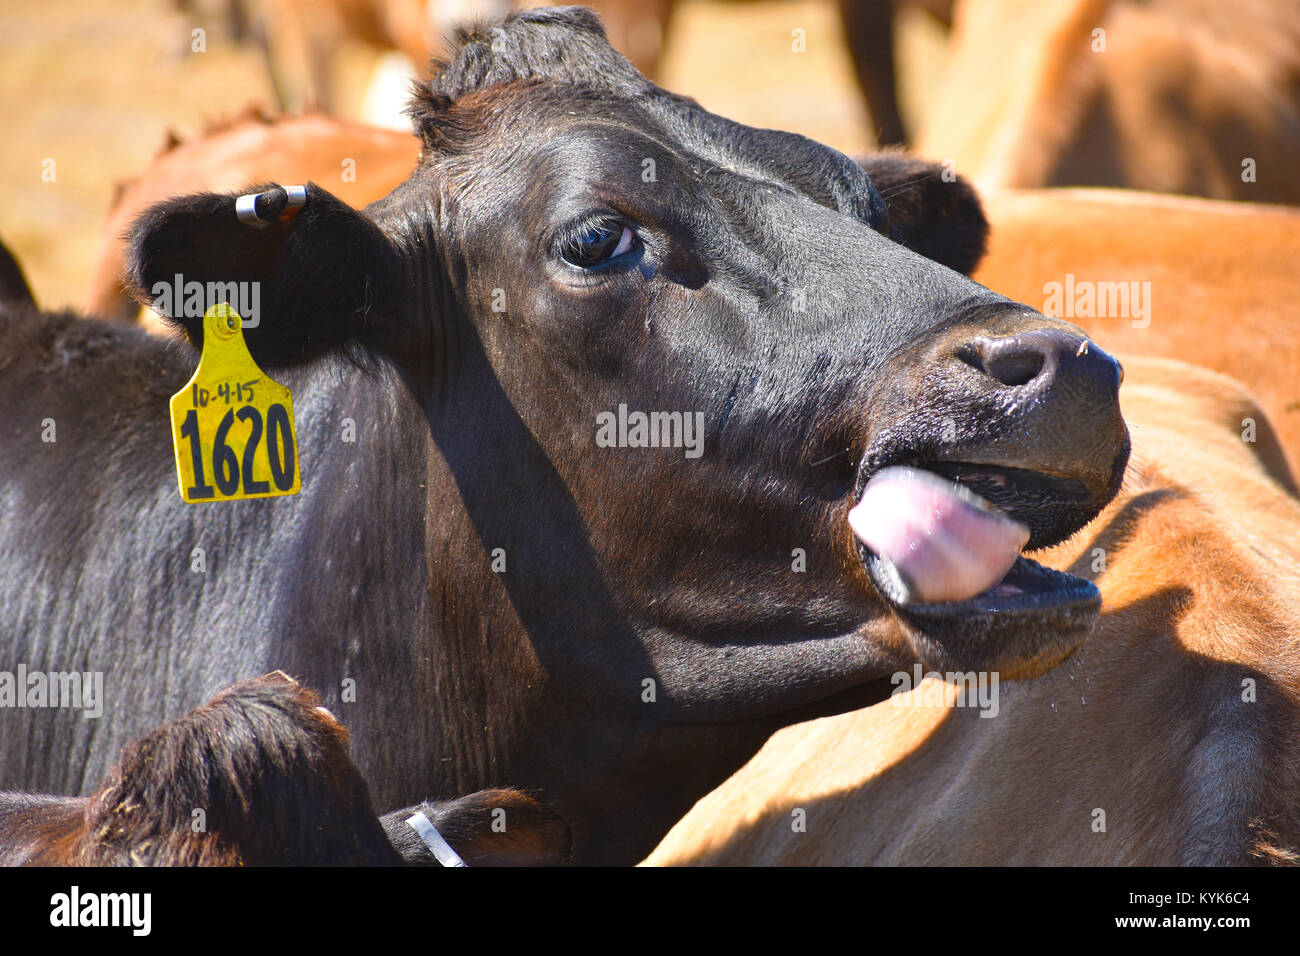 Black Angus cow looking happy it had something to eat, the cow's tongue is in motion. Stock Photo